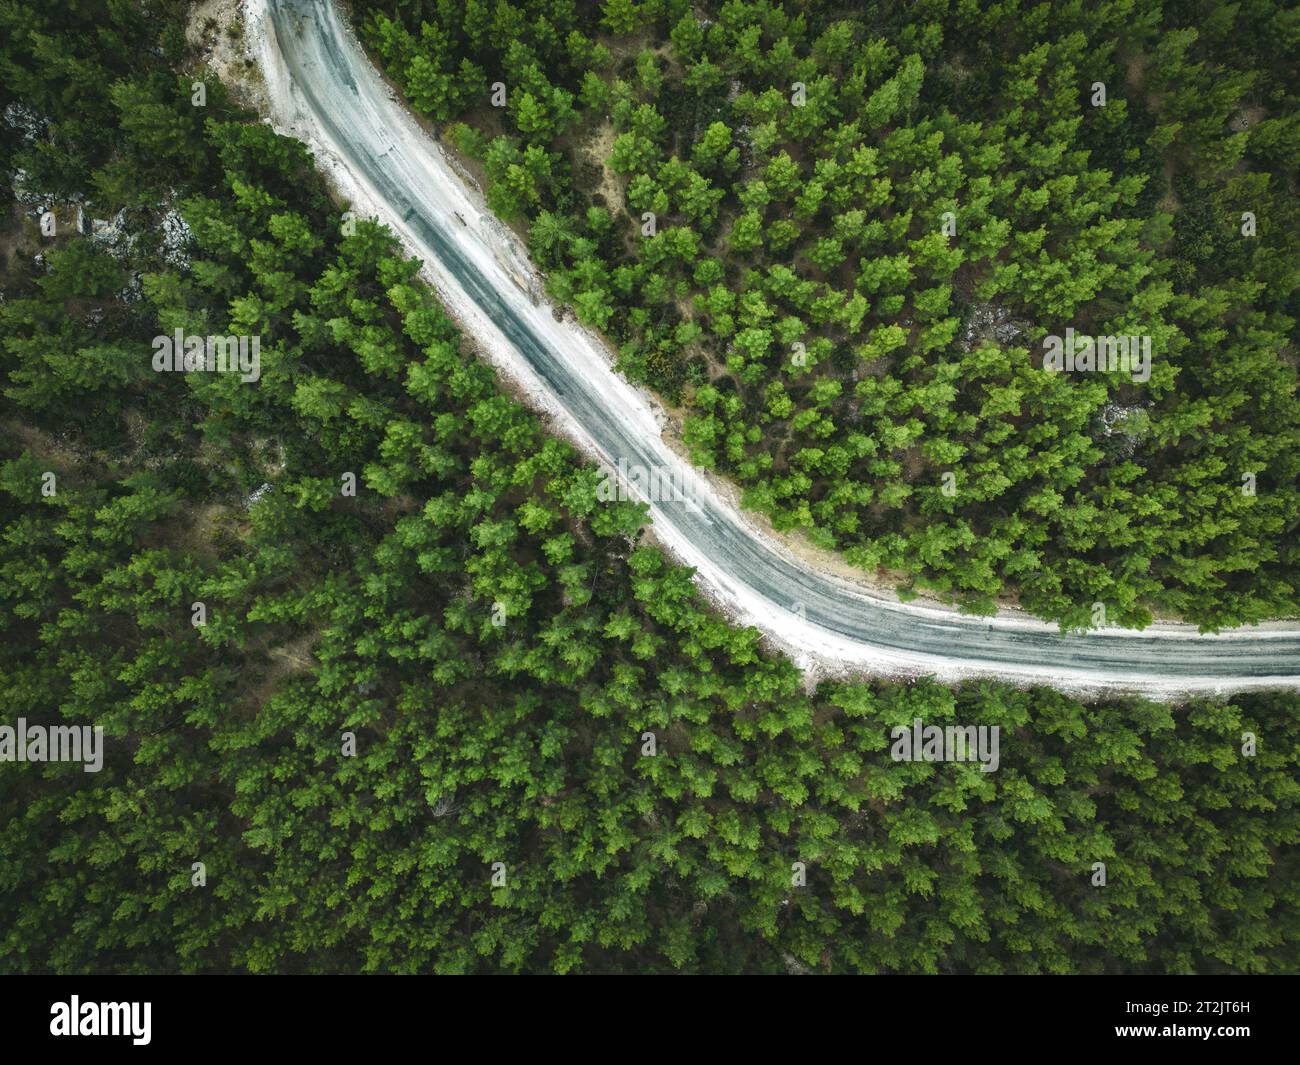 Aerial view of forest road with pine trees on both sides in autumn Stock Photo